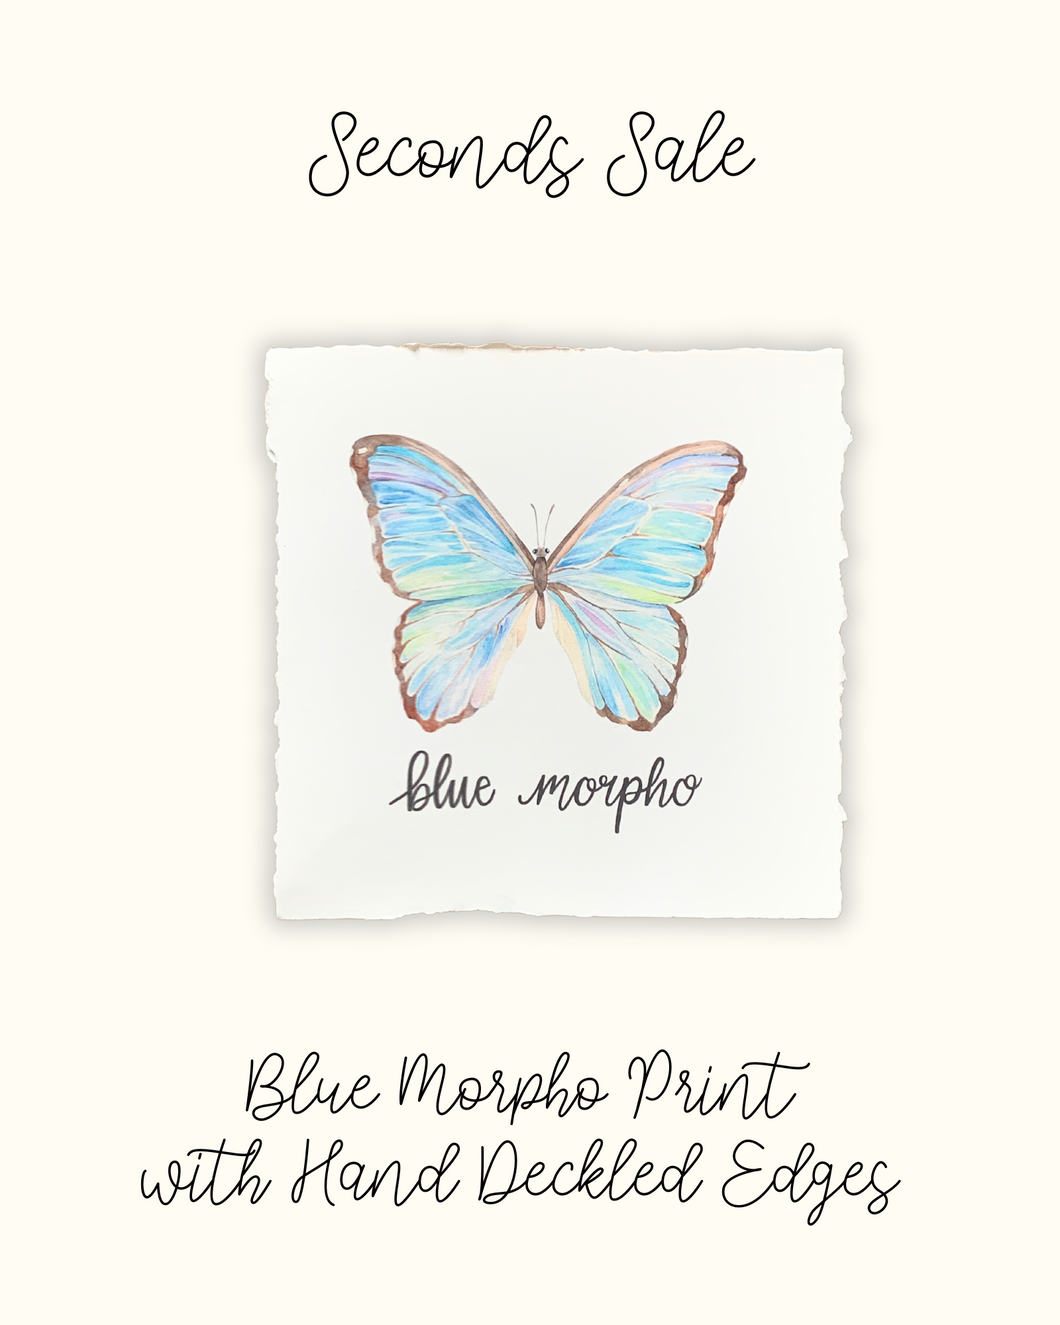 Blue Morpho Print with Hand Deckled Edge - Seconds Sale